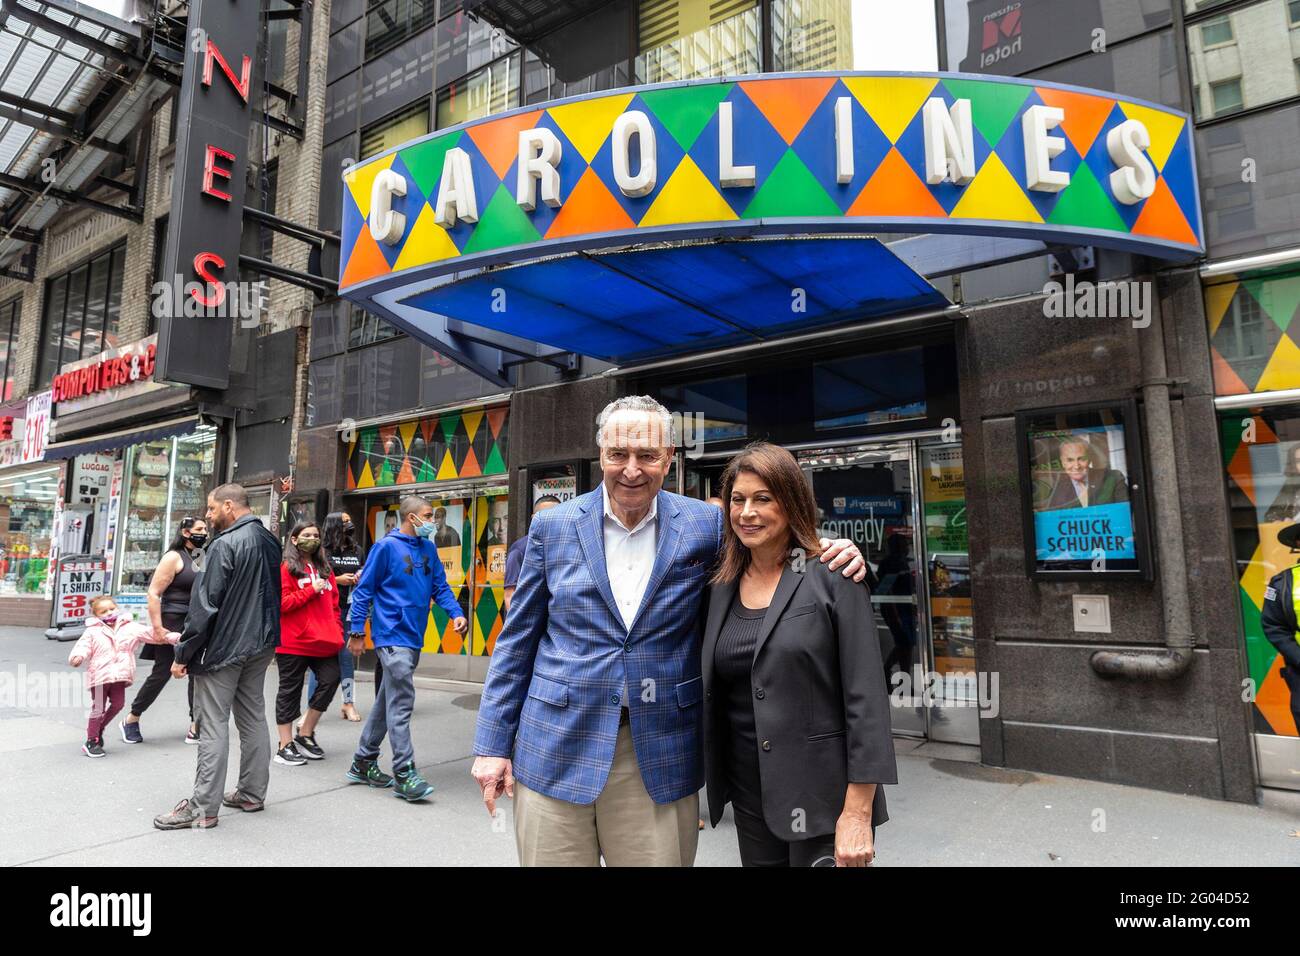 New York, United States. 31st May, 2021. U. S. Senator Charles Schumer and Caroline Hirsch pose outside of Carolines on Broadway comedy club after re-opening ceremony. Senator Charles Schumer lauded Safe our Stages (SOS) bill passed by Senate to help cultural venues to survive pandemic. He also cracked few jokes saying it is comedy club he does not have a choice but say them. (Photo by Lev Radin/Pacific Press) Credit: Pacific Press Media Production Corp./Alamy Live News Stock Photo